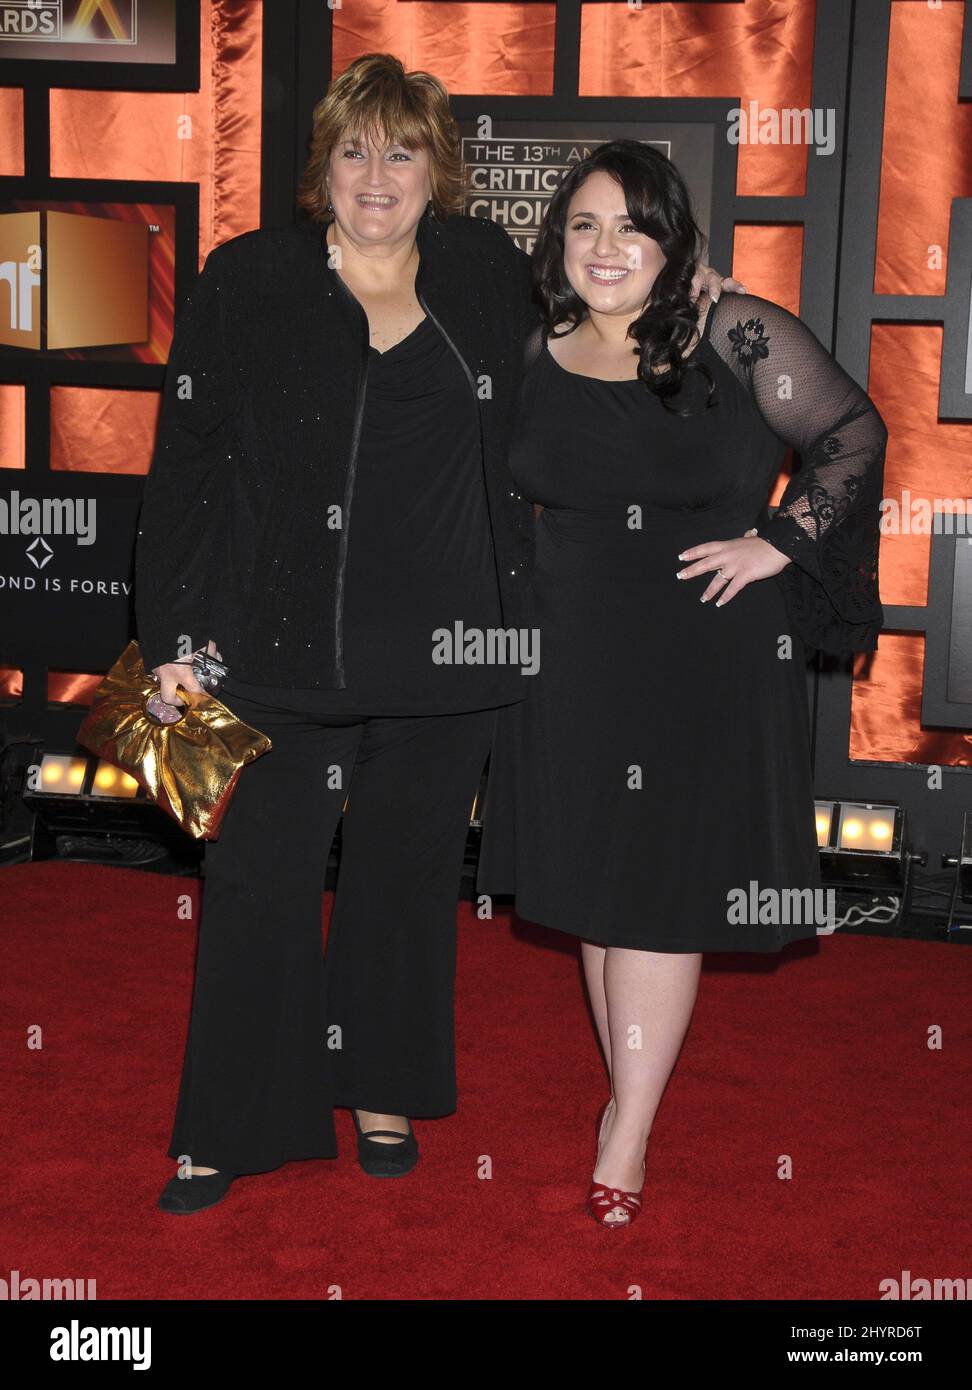 Nikki Blonsky and mother attend the 13th Annual Critics' Choice Awards at the Santa Monica Civic Auditorium, Los Angeles. Stock Photo